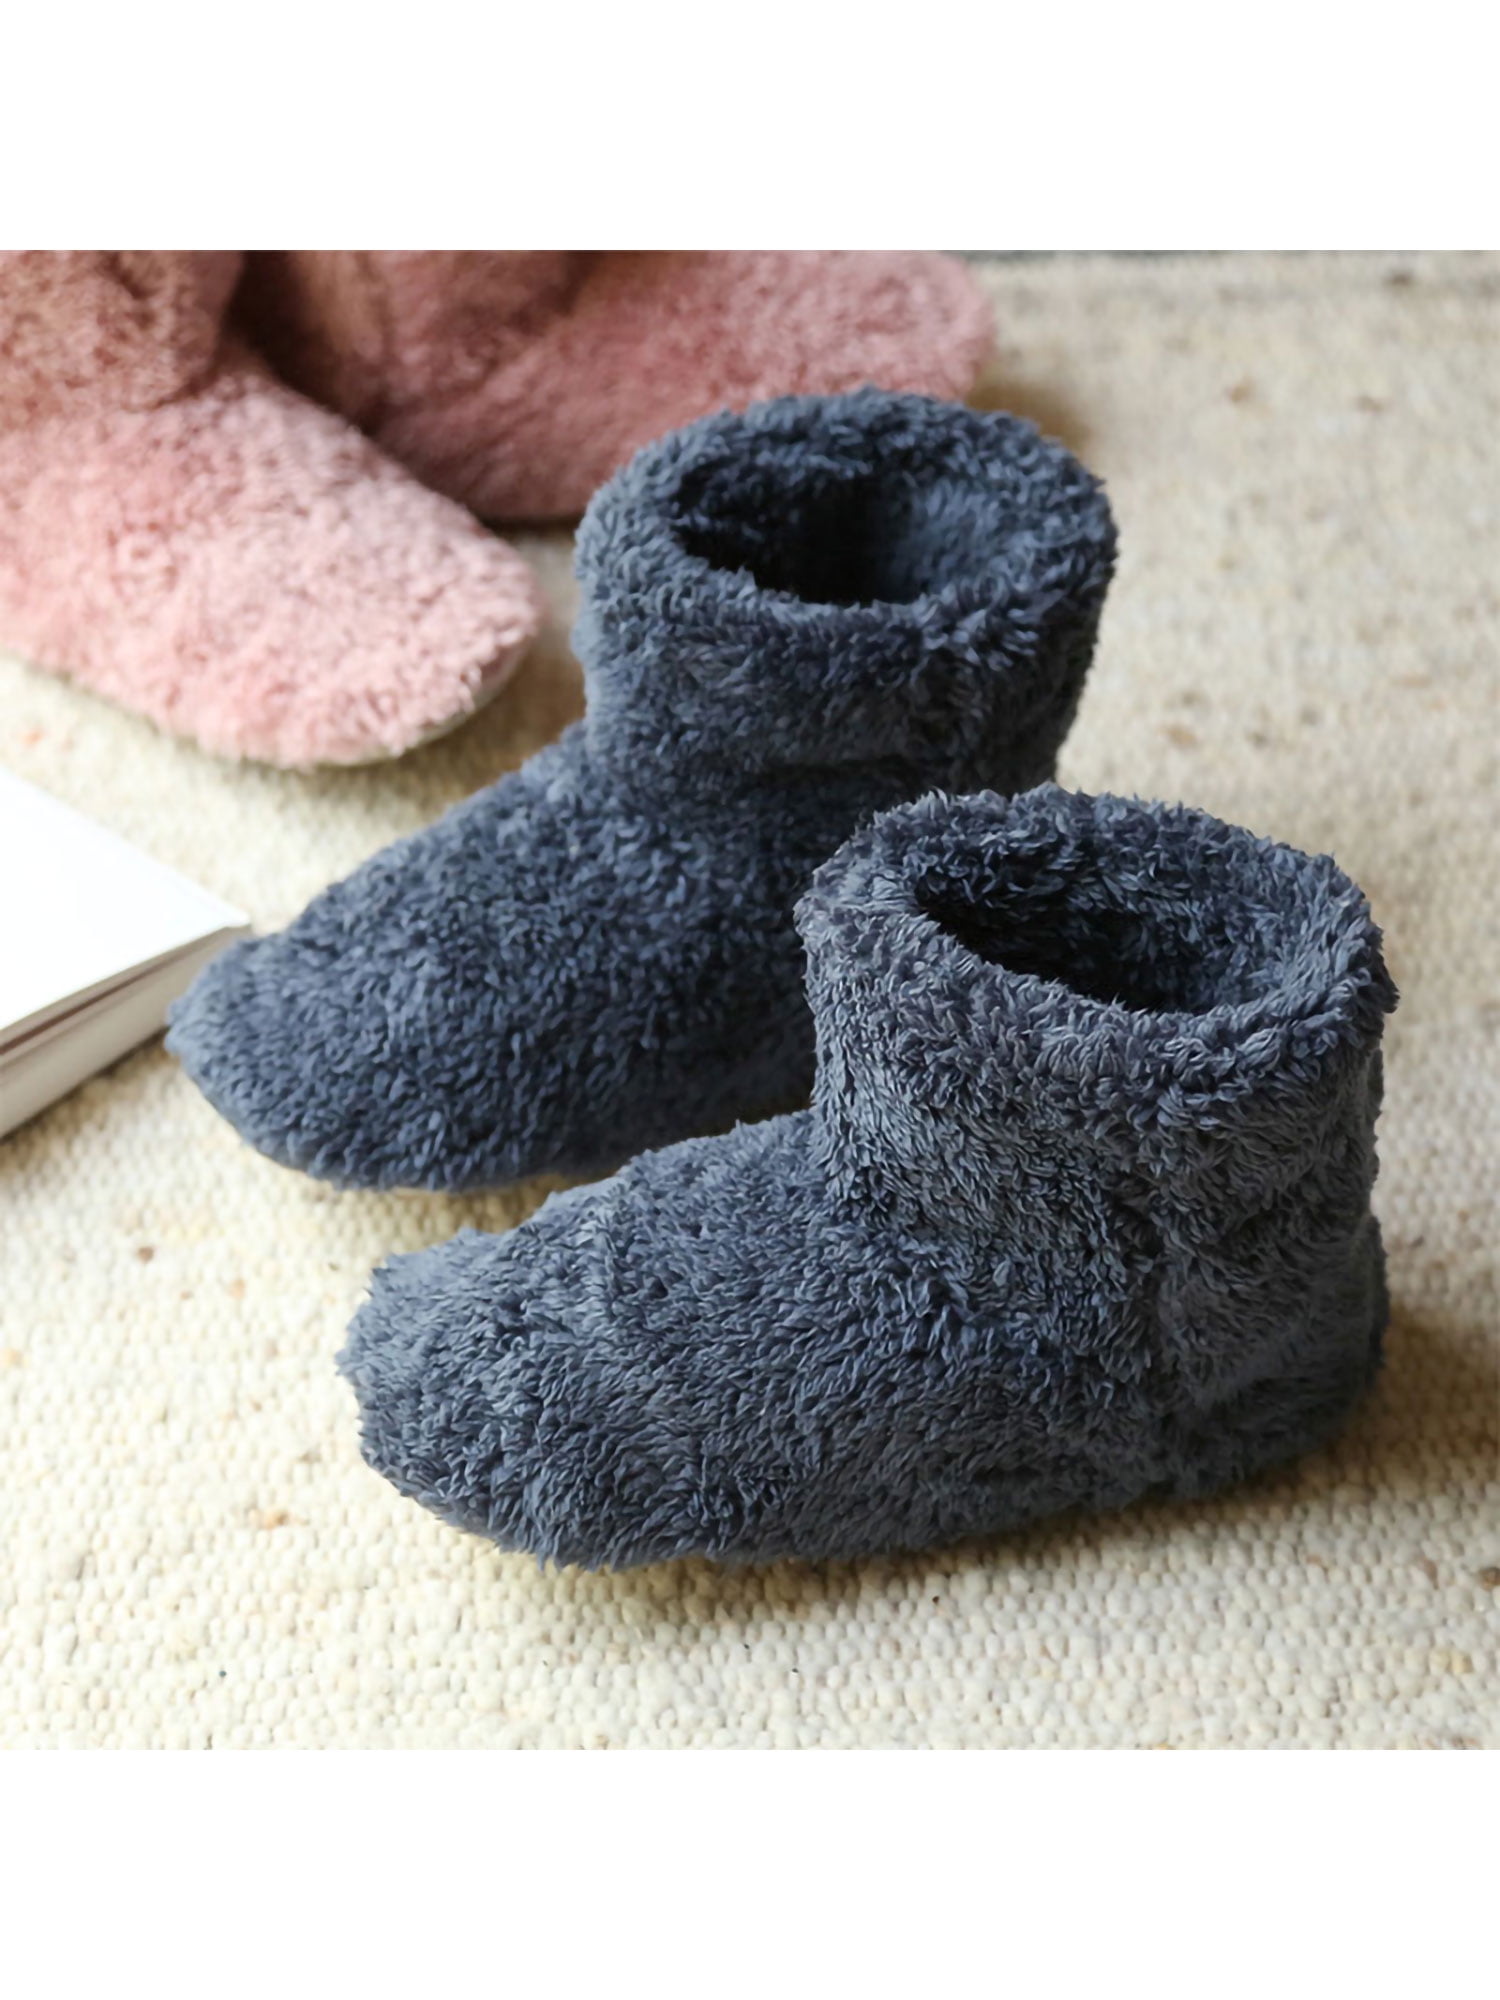 Harsuny Home Soft Boots Cozy Slipper Indoor Home Ankle Bootie Slippers ...